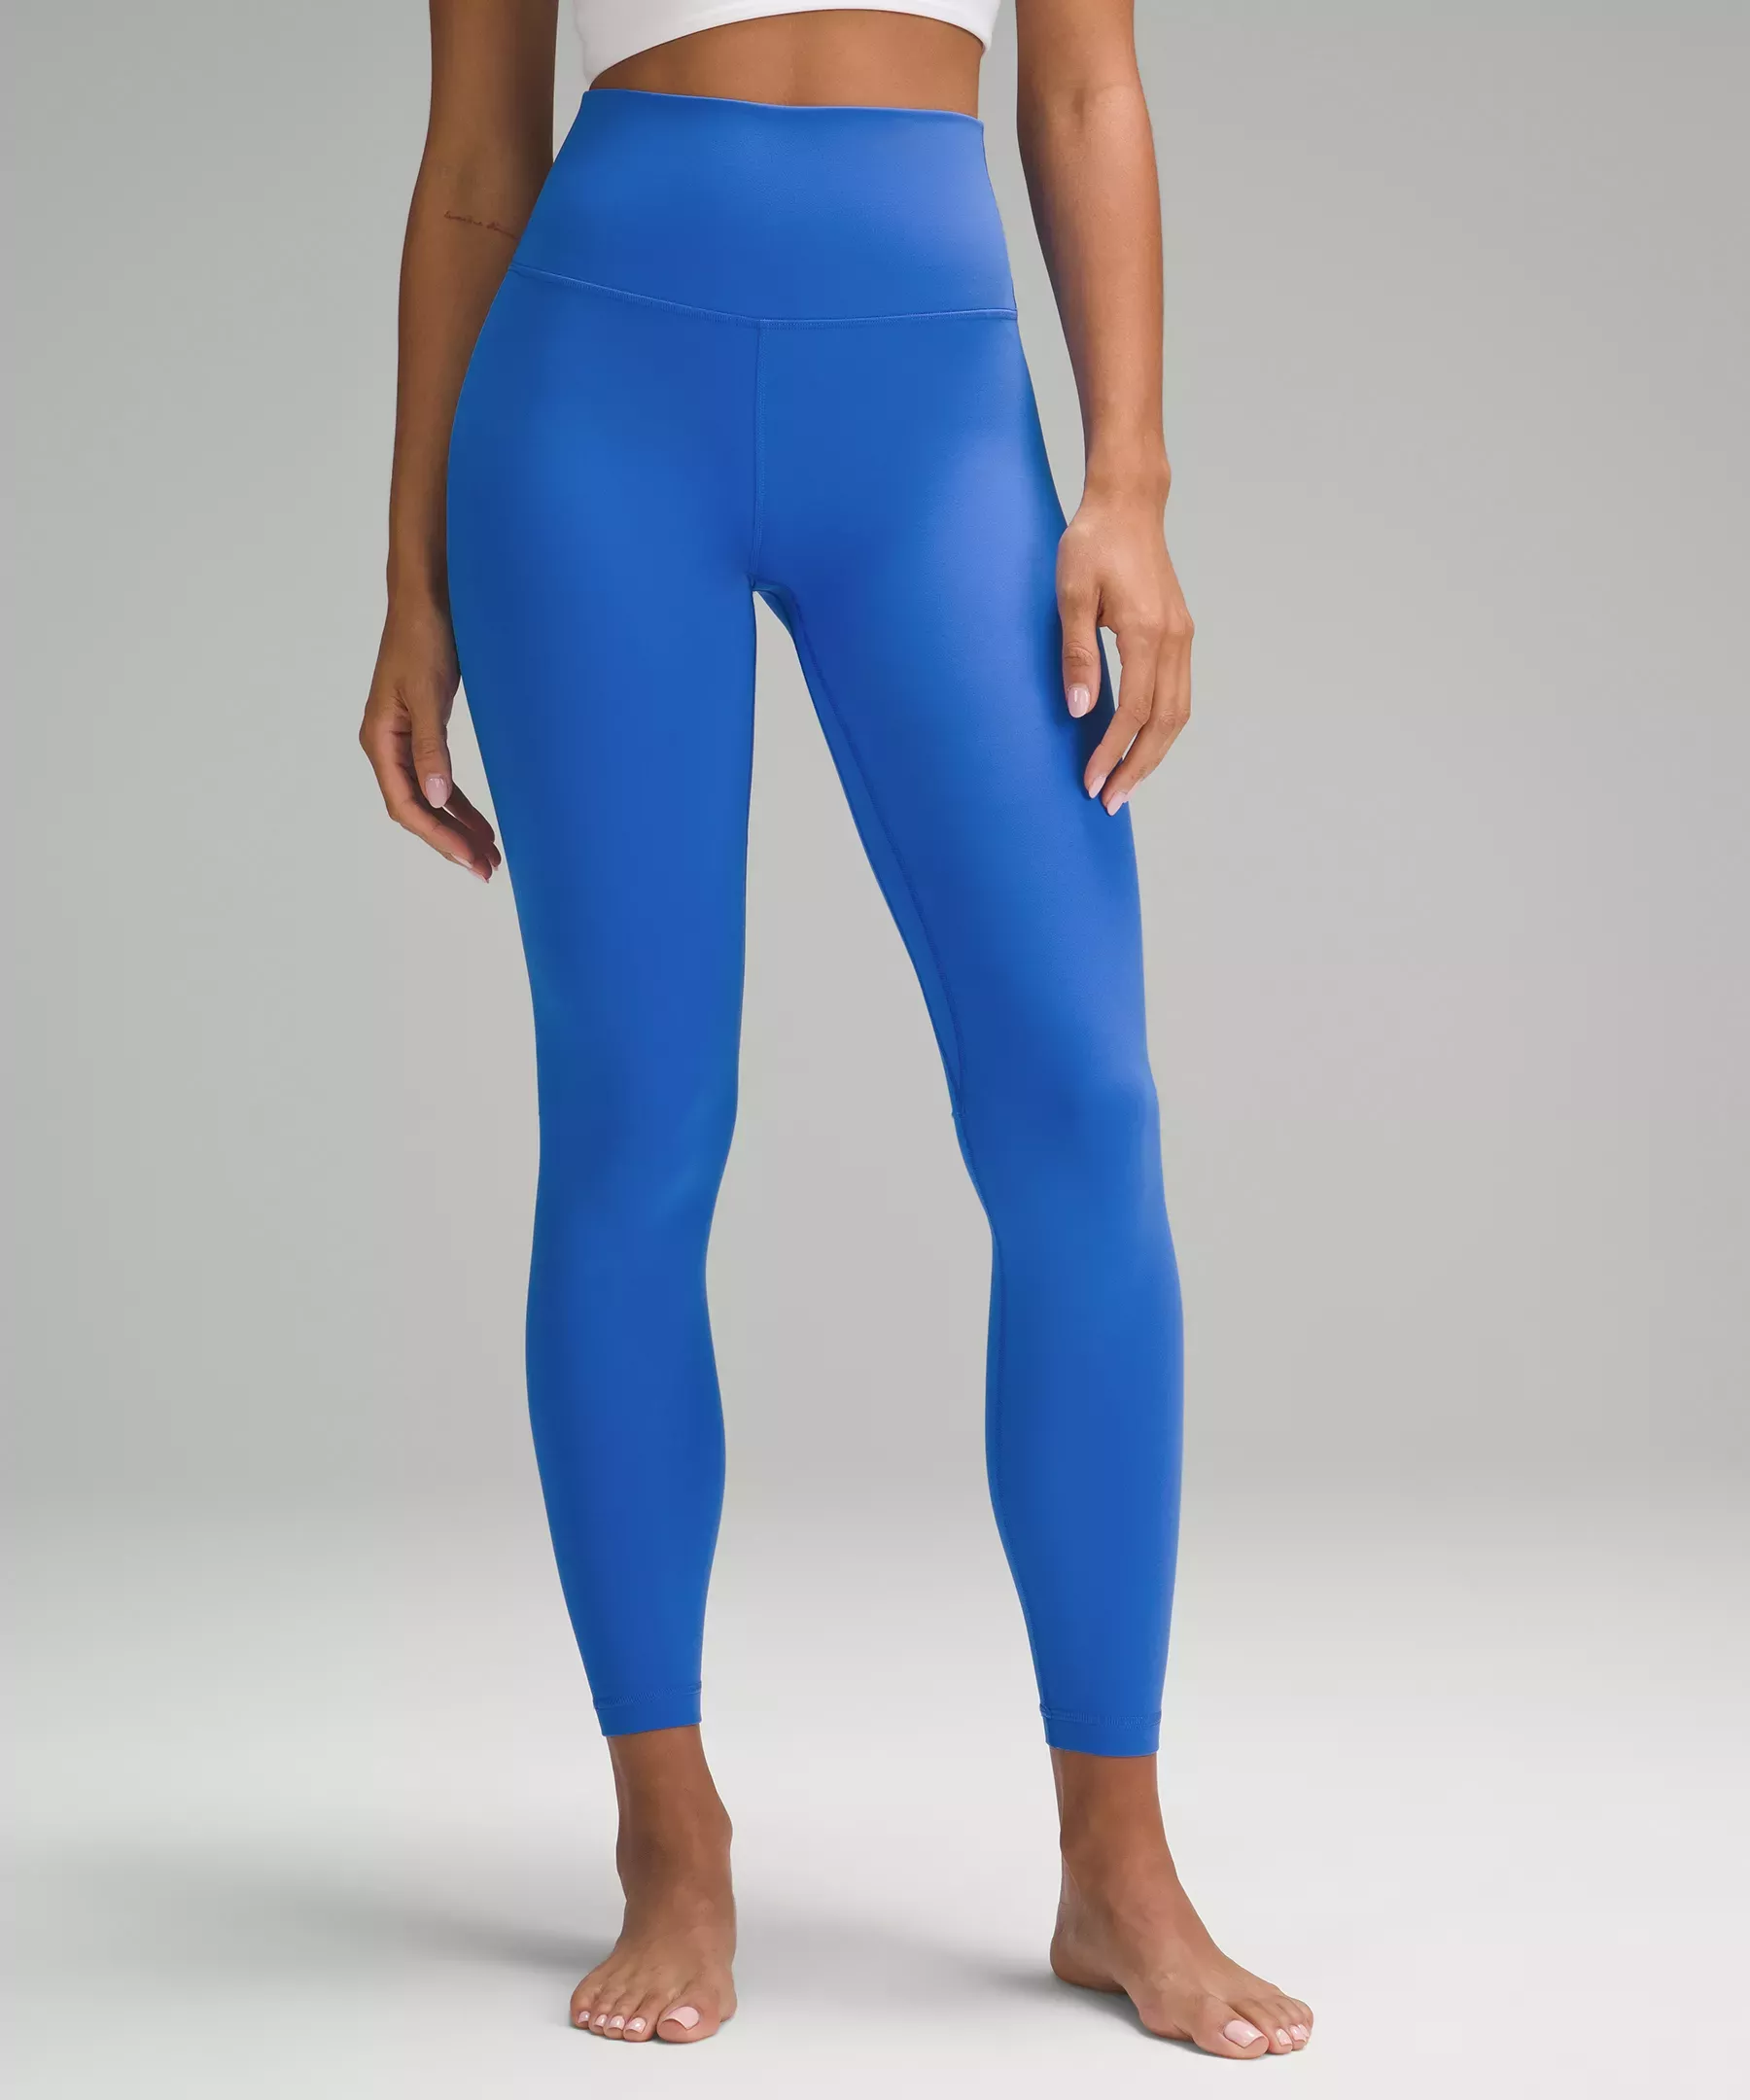 sheer blue🩵 loved the scuba so much had to get the aligns😍 : r/lululemon